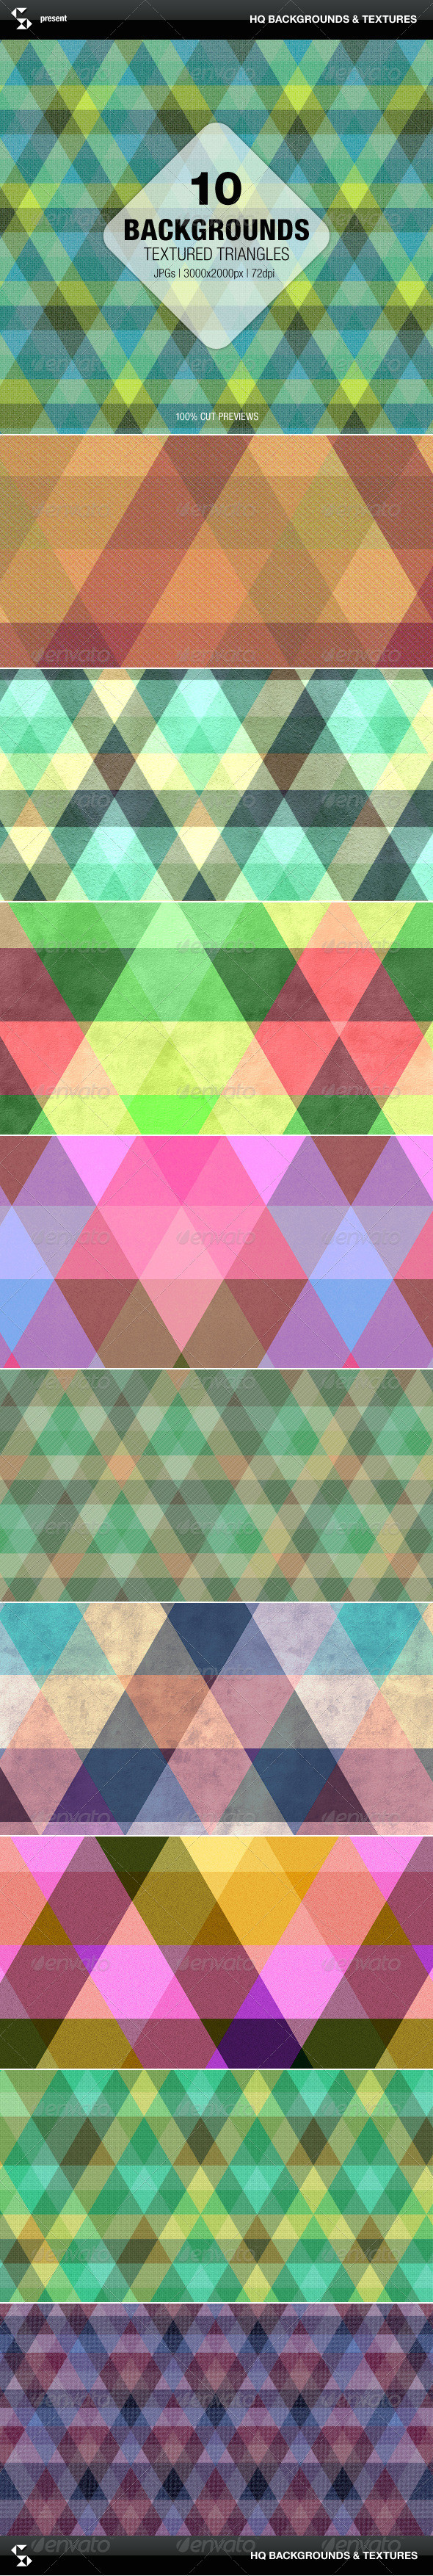 Textured geometric backgrounds preview